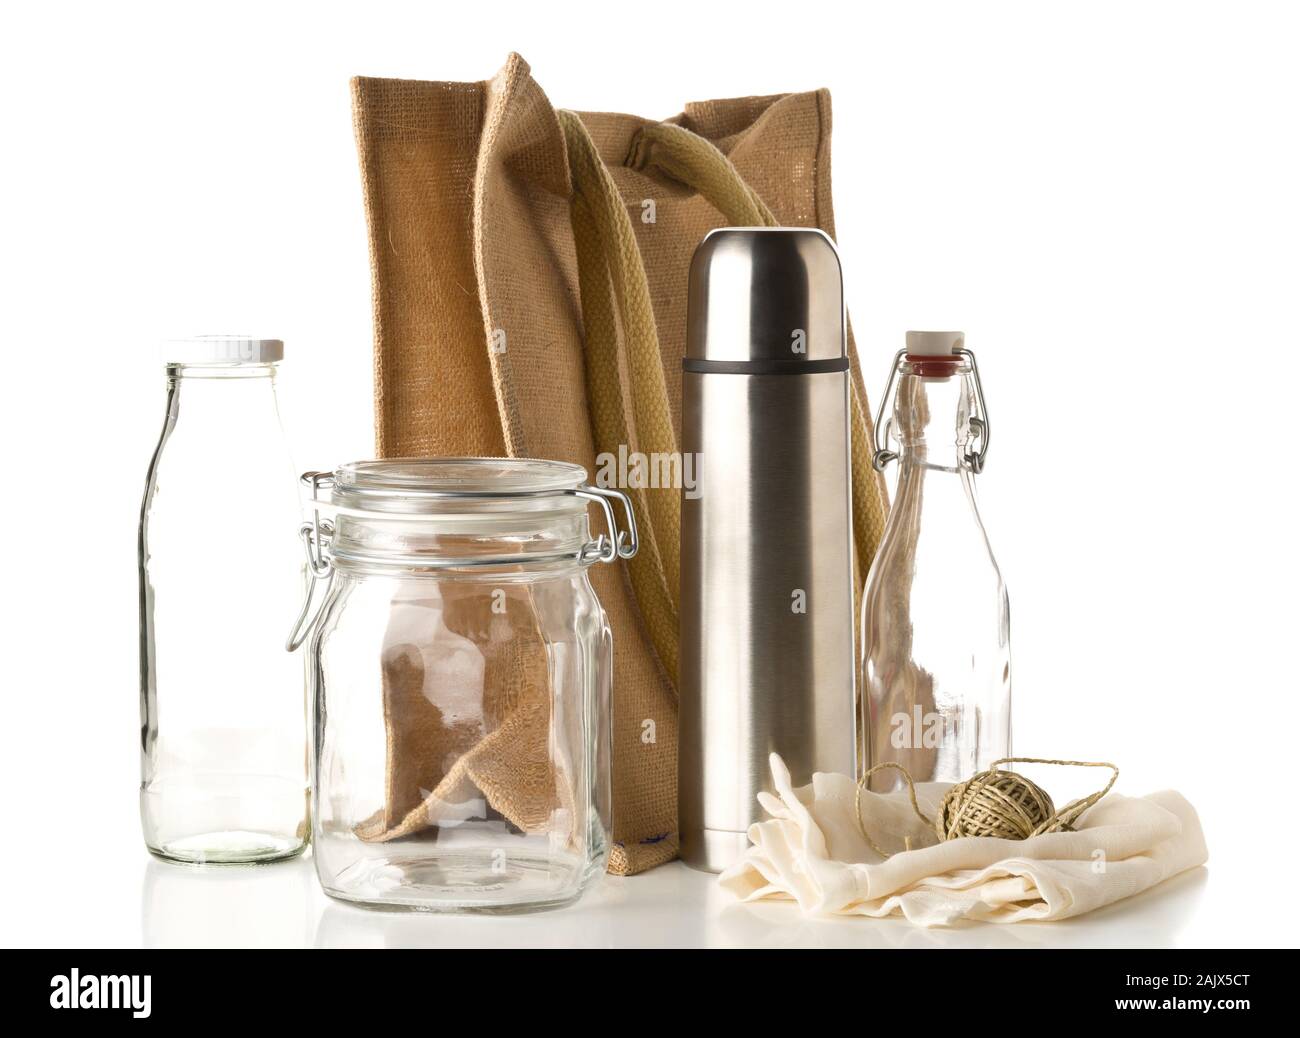 Zero waste or waste free shopping utensils with burlap bag, glass bottles and cotton bag over white background - waste reduction eco lifestyle or bulk Stock Photo